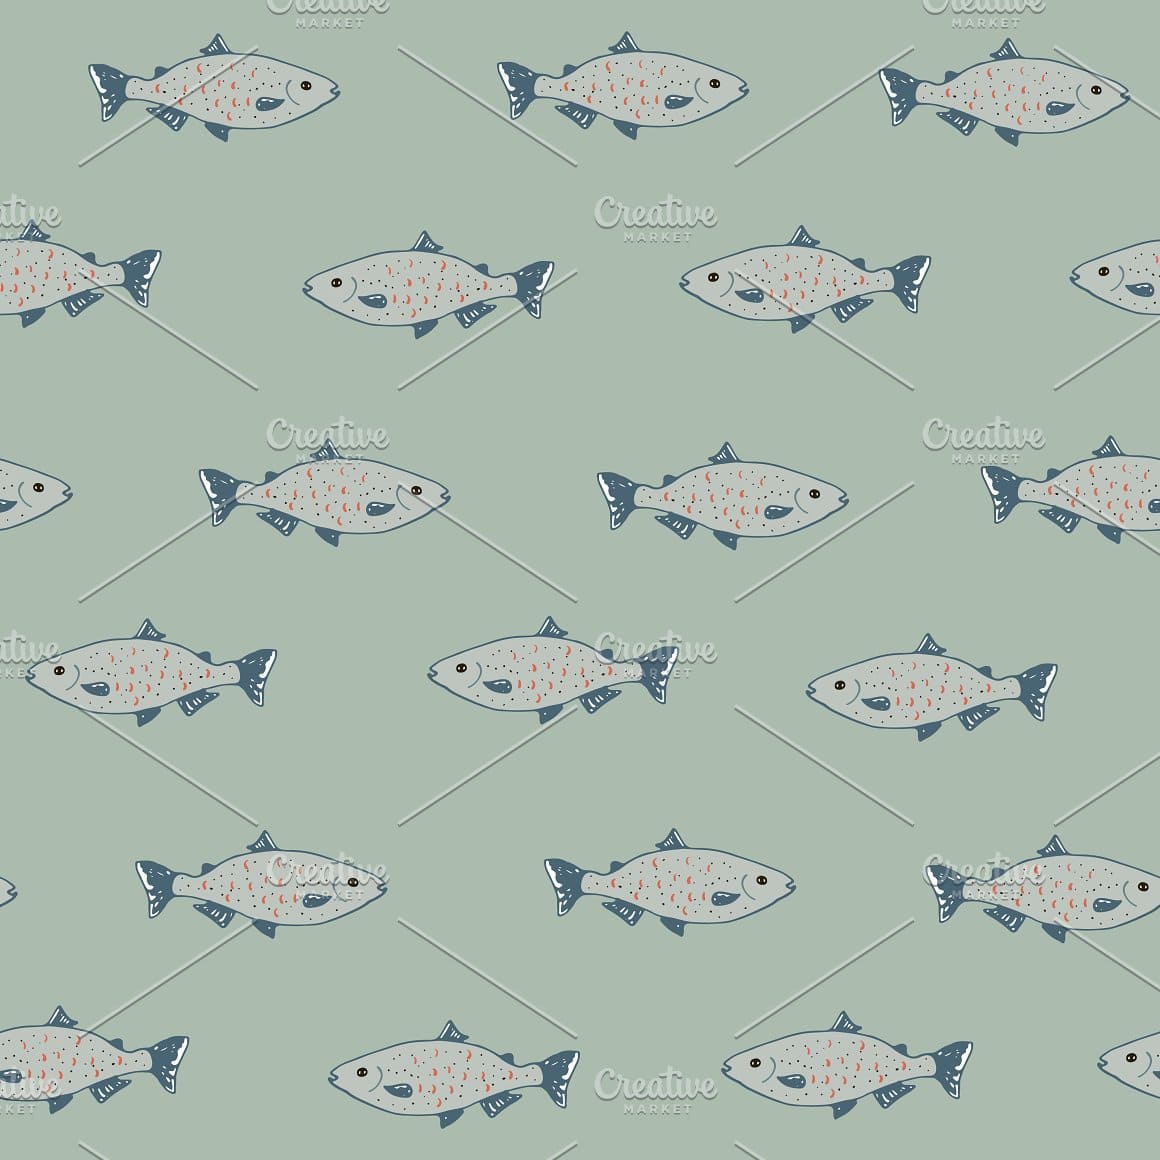 Light gray-blue fish with dark fins on a light gray background.